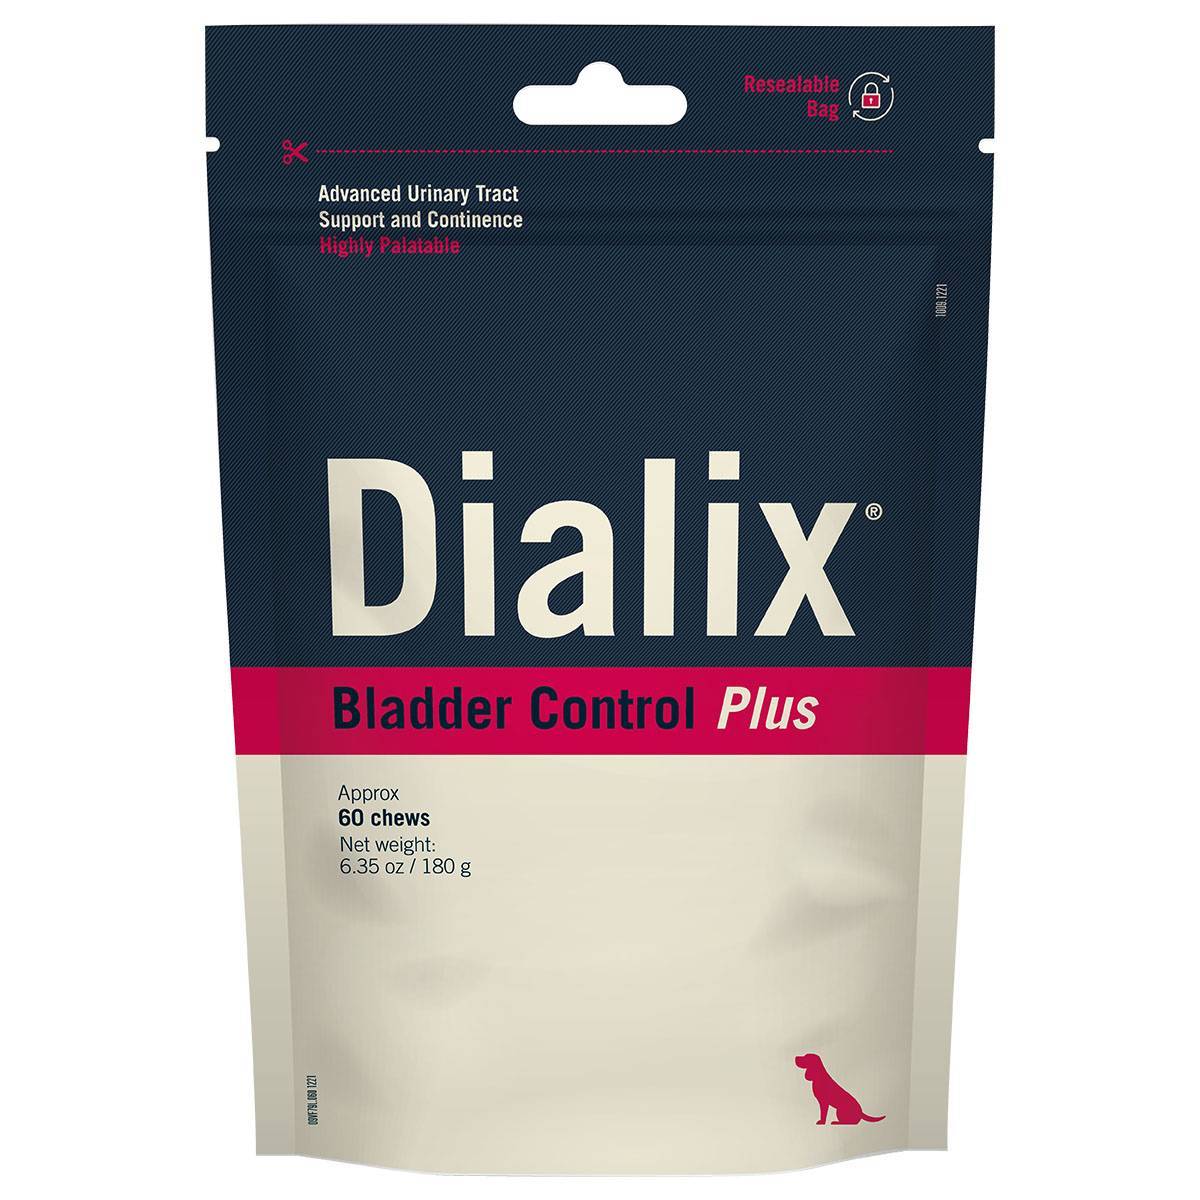 Dialix Bladder Control Plus for Dogs - Urinary Tract Support